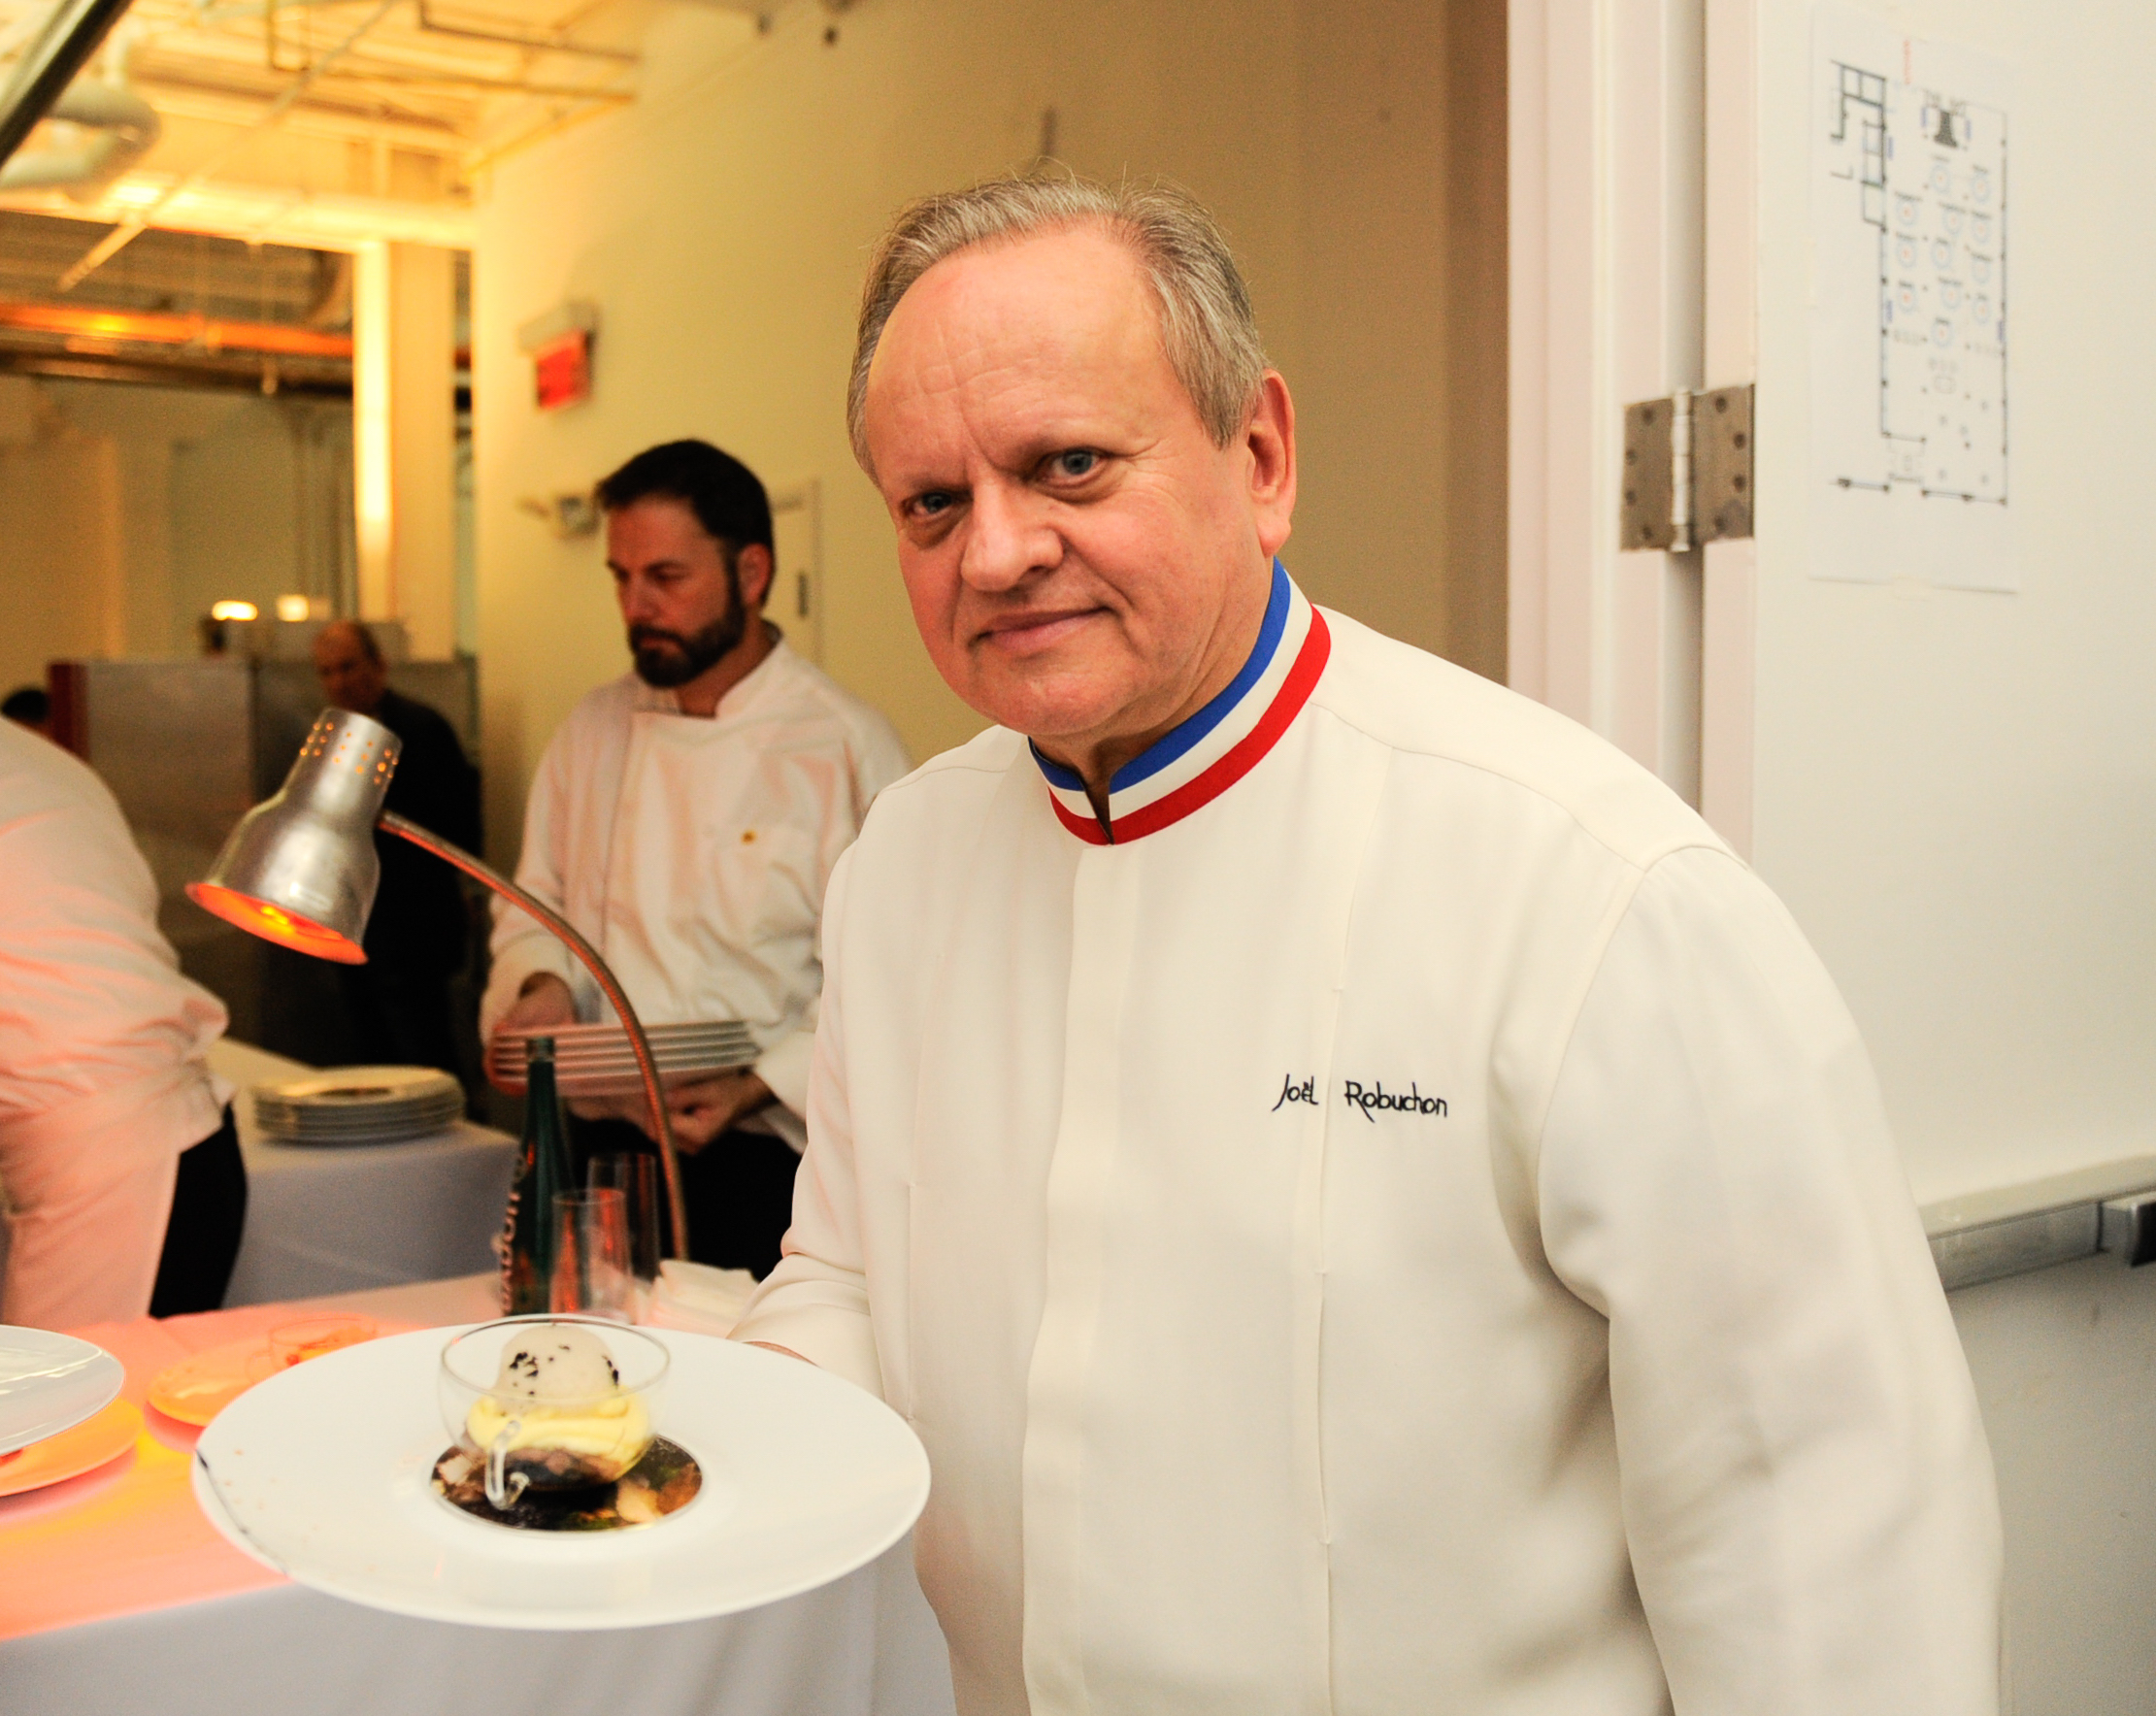 Joël Robuchon’s most famous dishes 